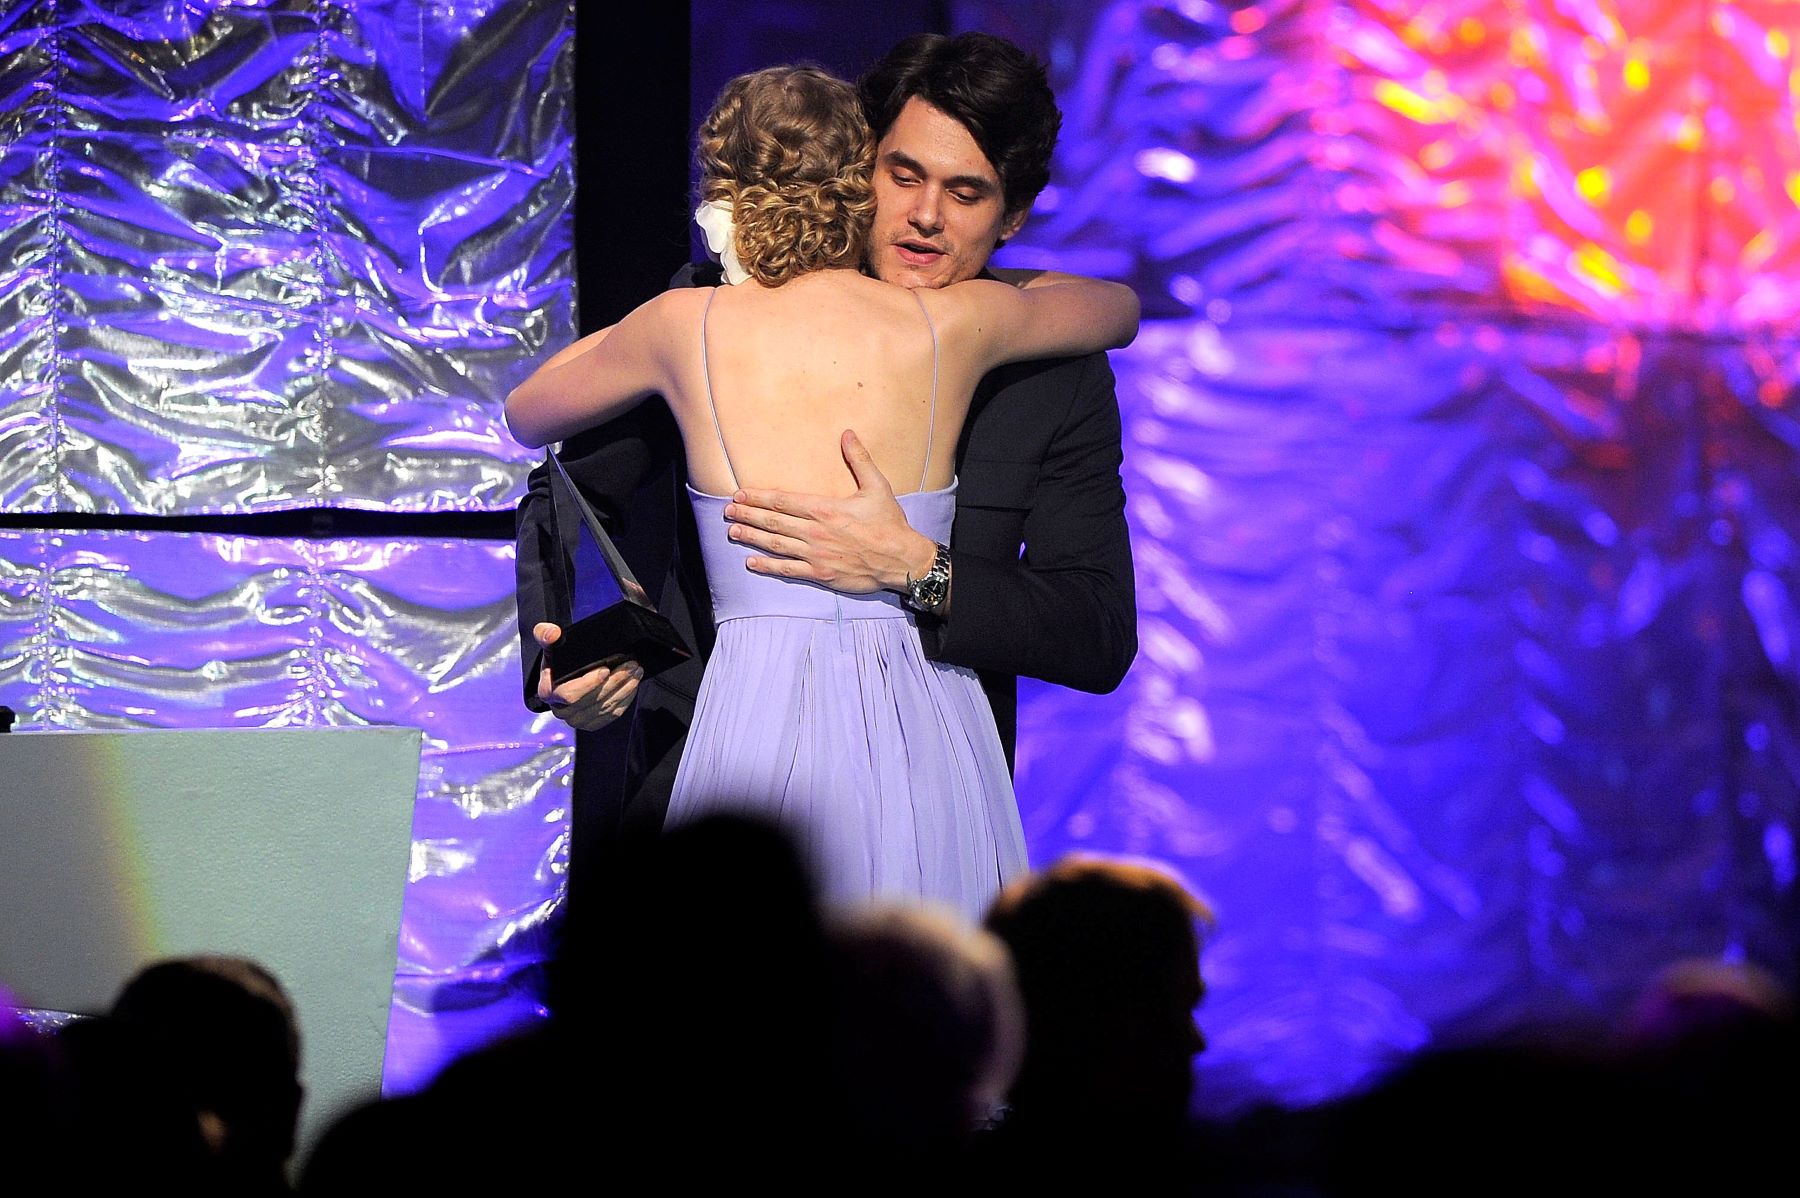 John Mayer and Taylor Swift in June 2010